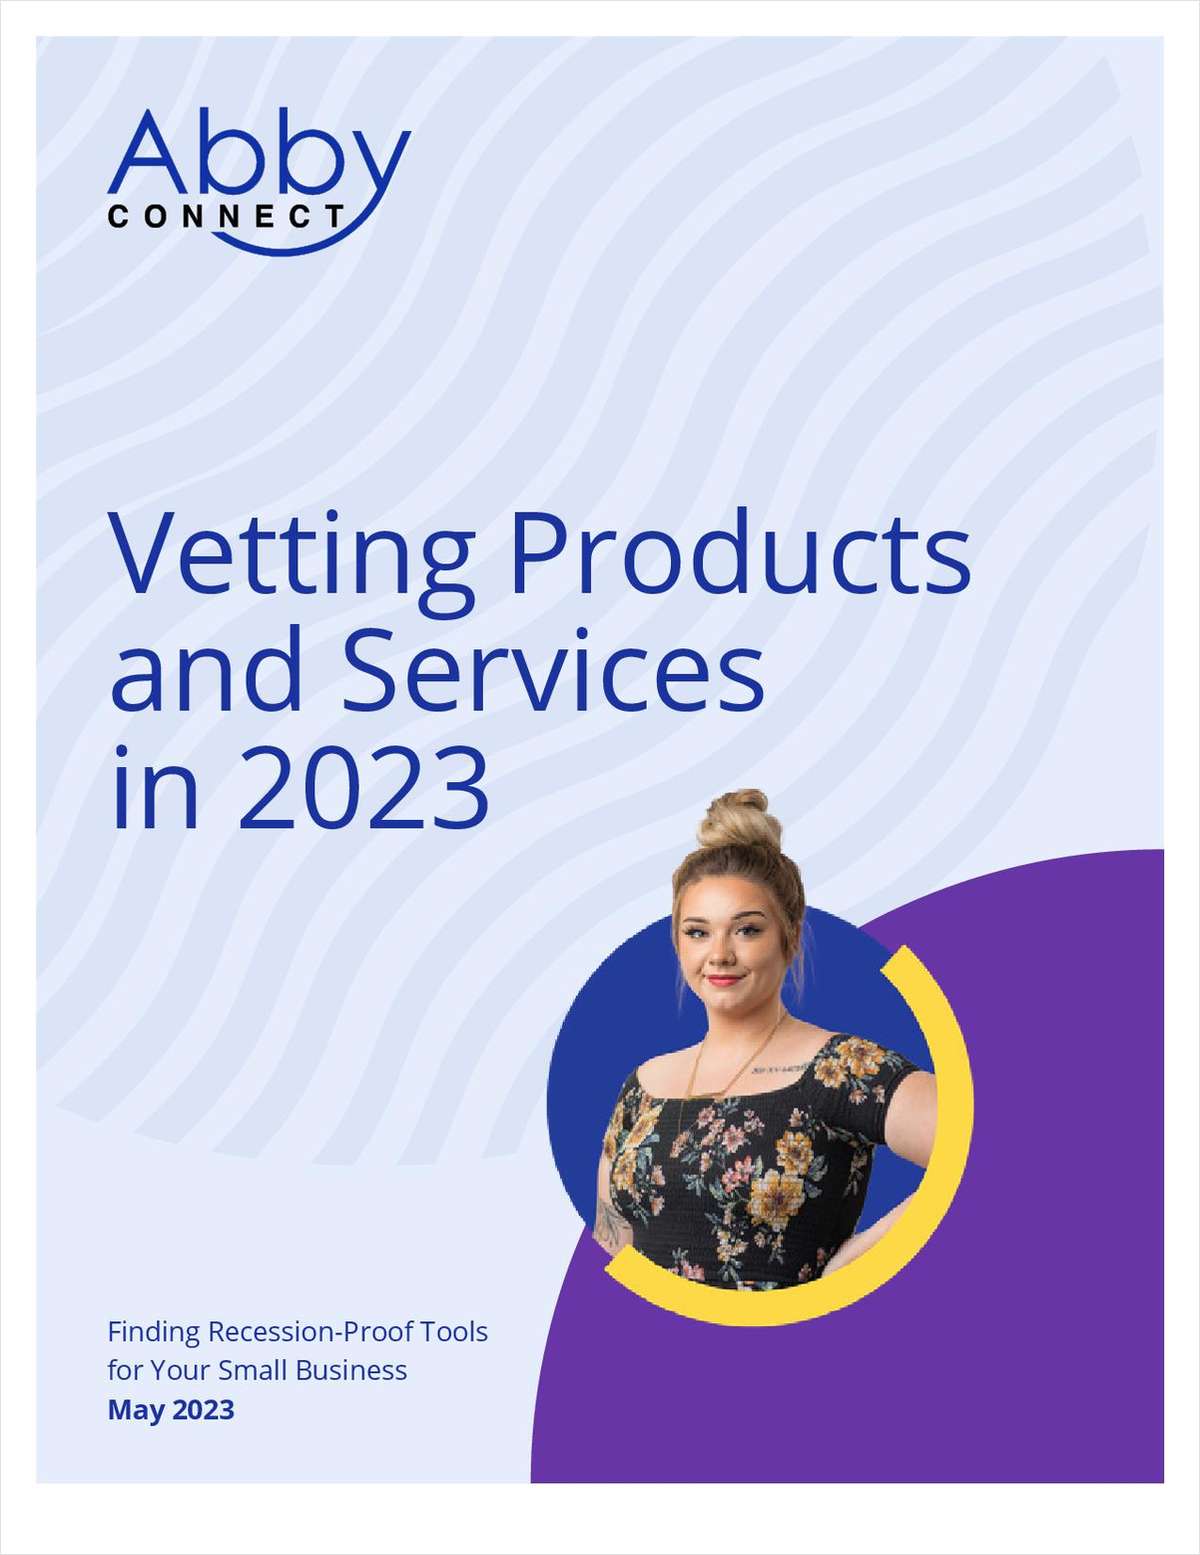 Vetting Products and Services in 2023